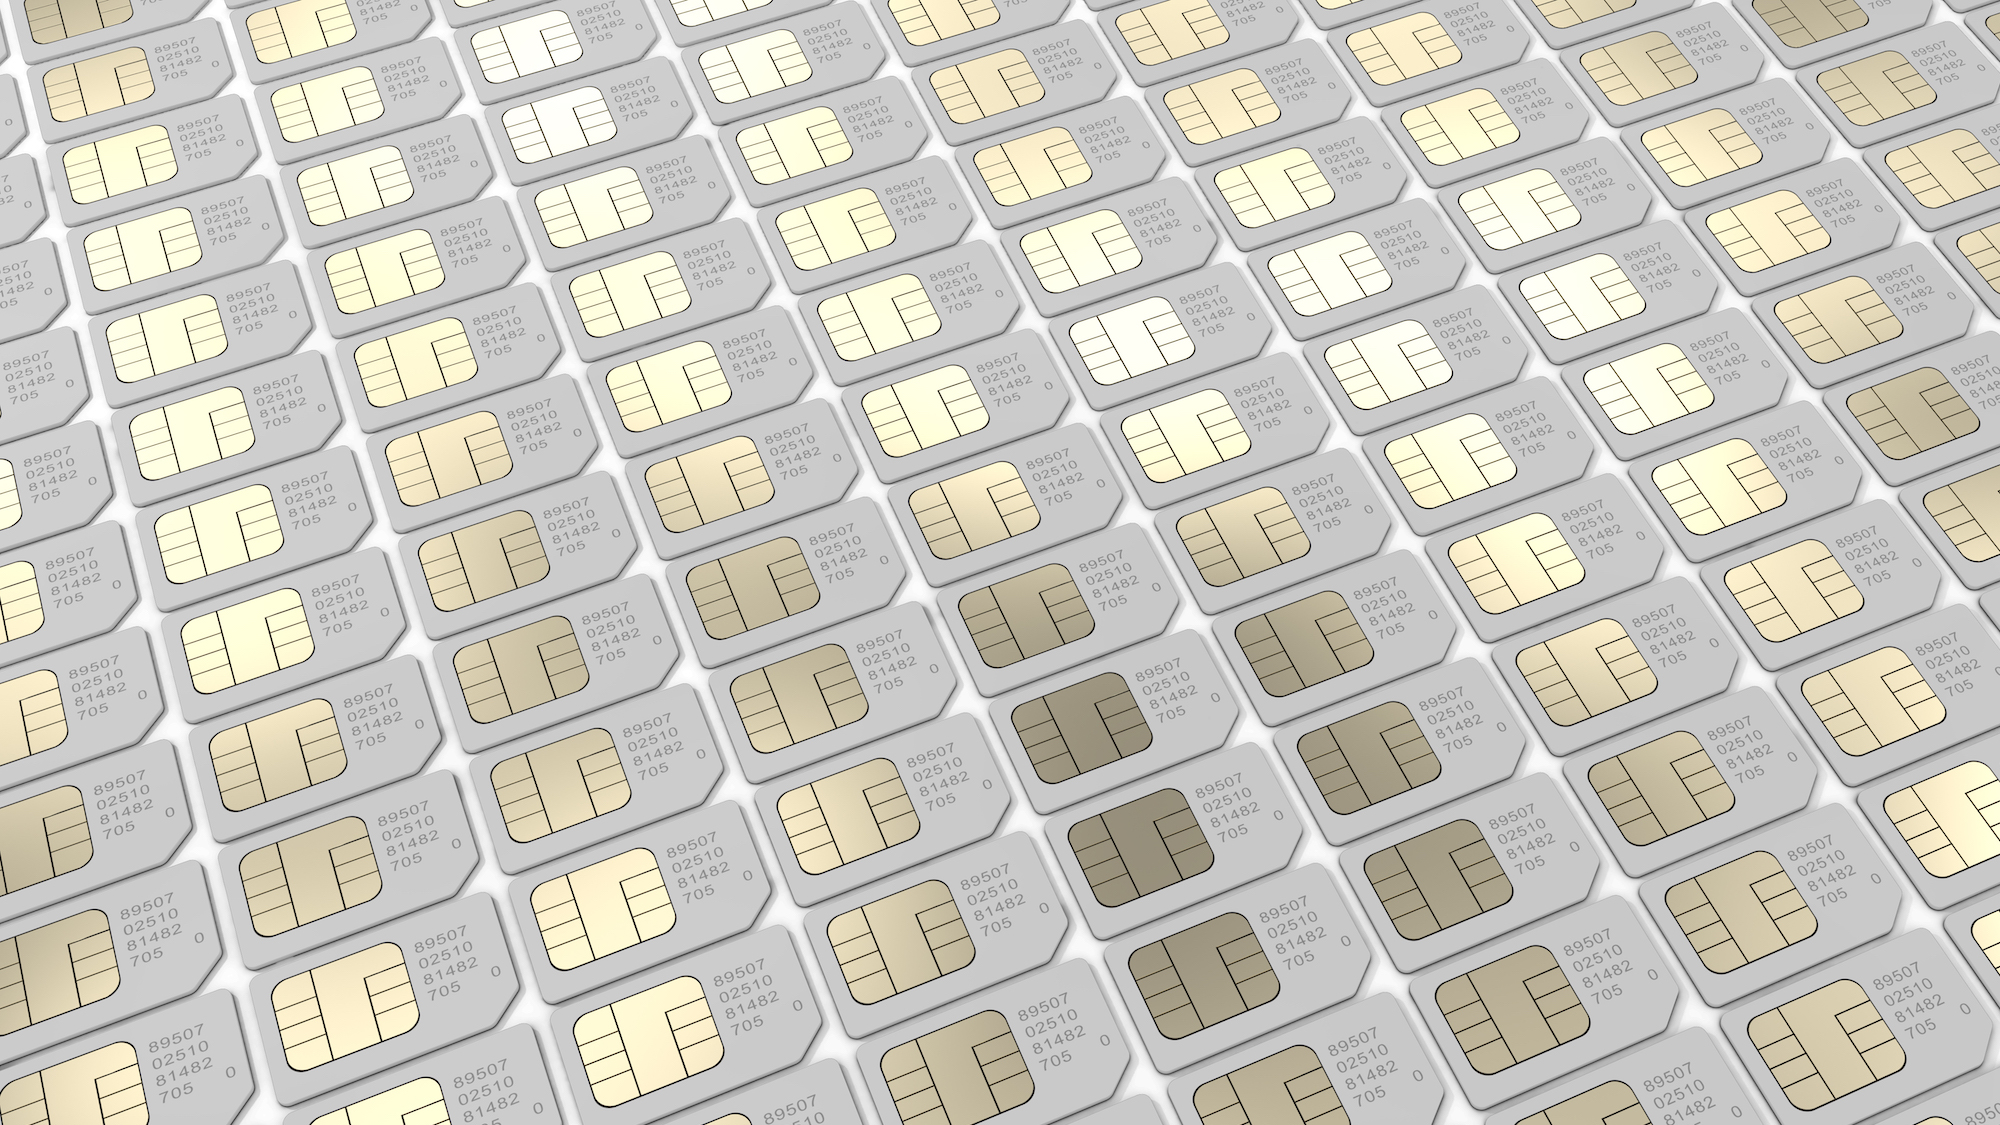 rows of white SIM cards showing their reflective shiny metal surface